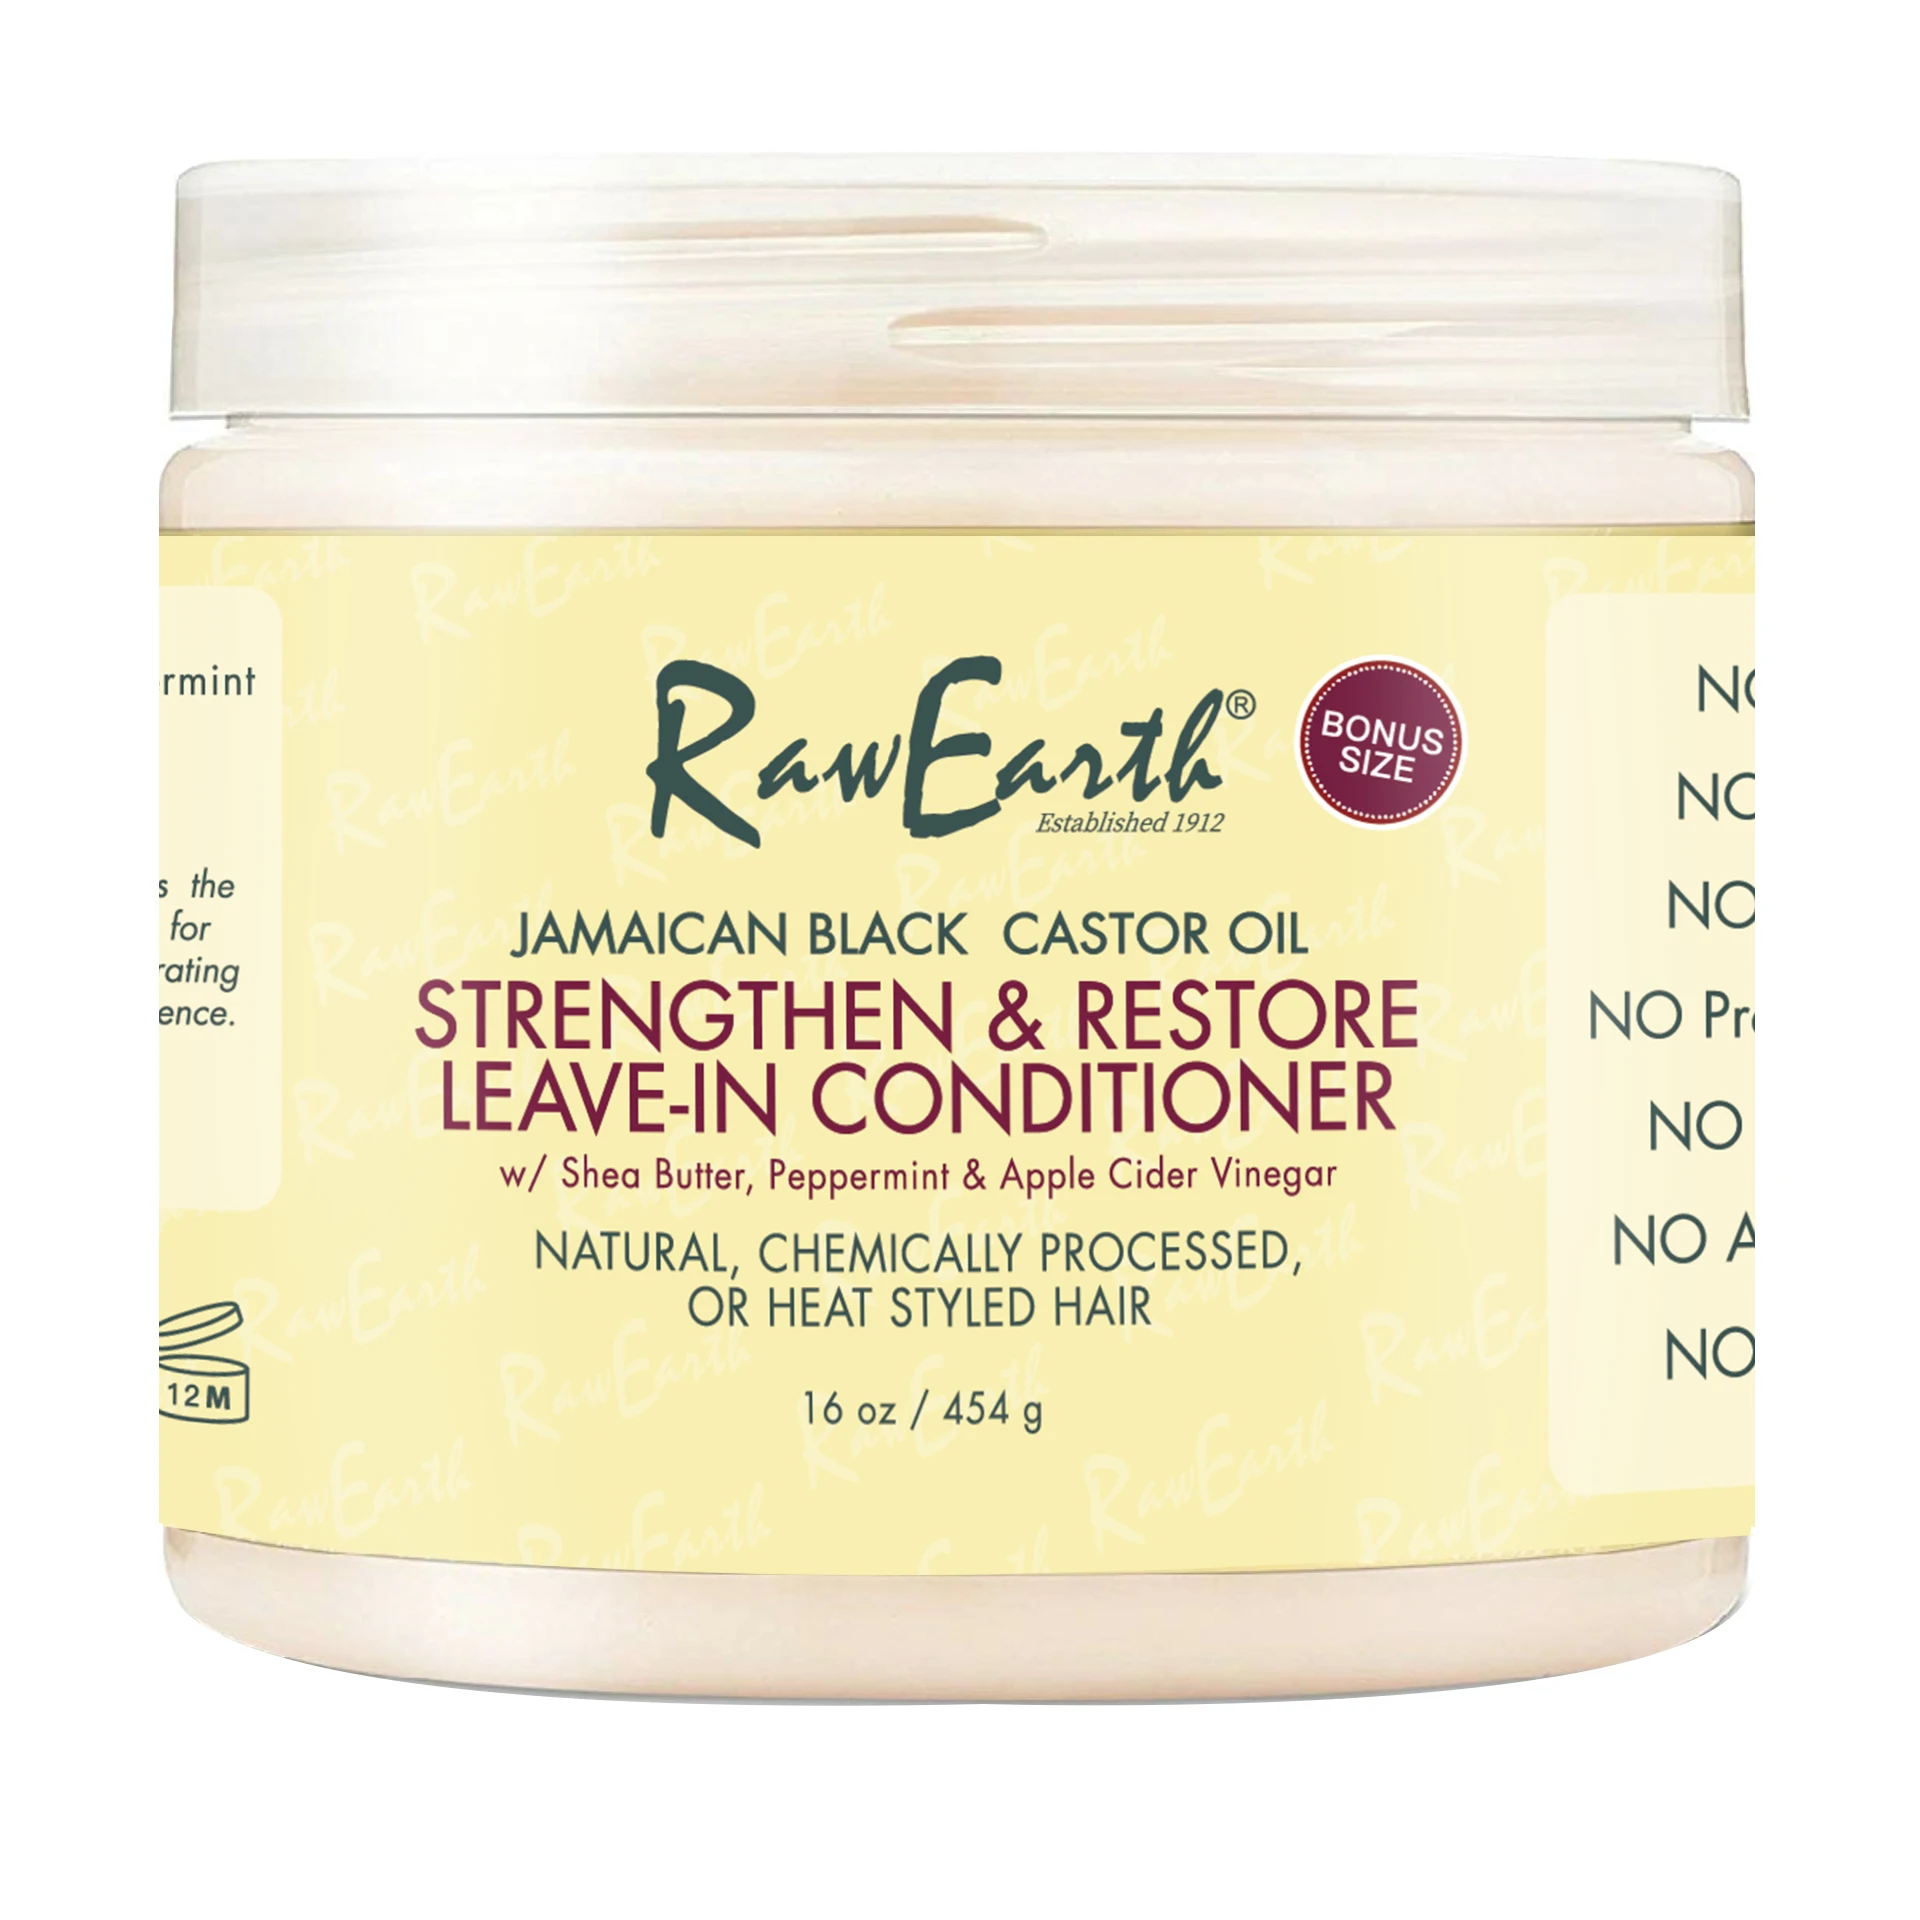 

Raw Earth Jamaican Black Castor Oil Helps Moisturize&Regrow Strong Healthy Hair Leave in Conditioner